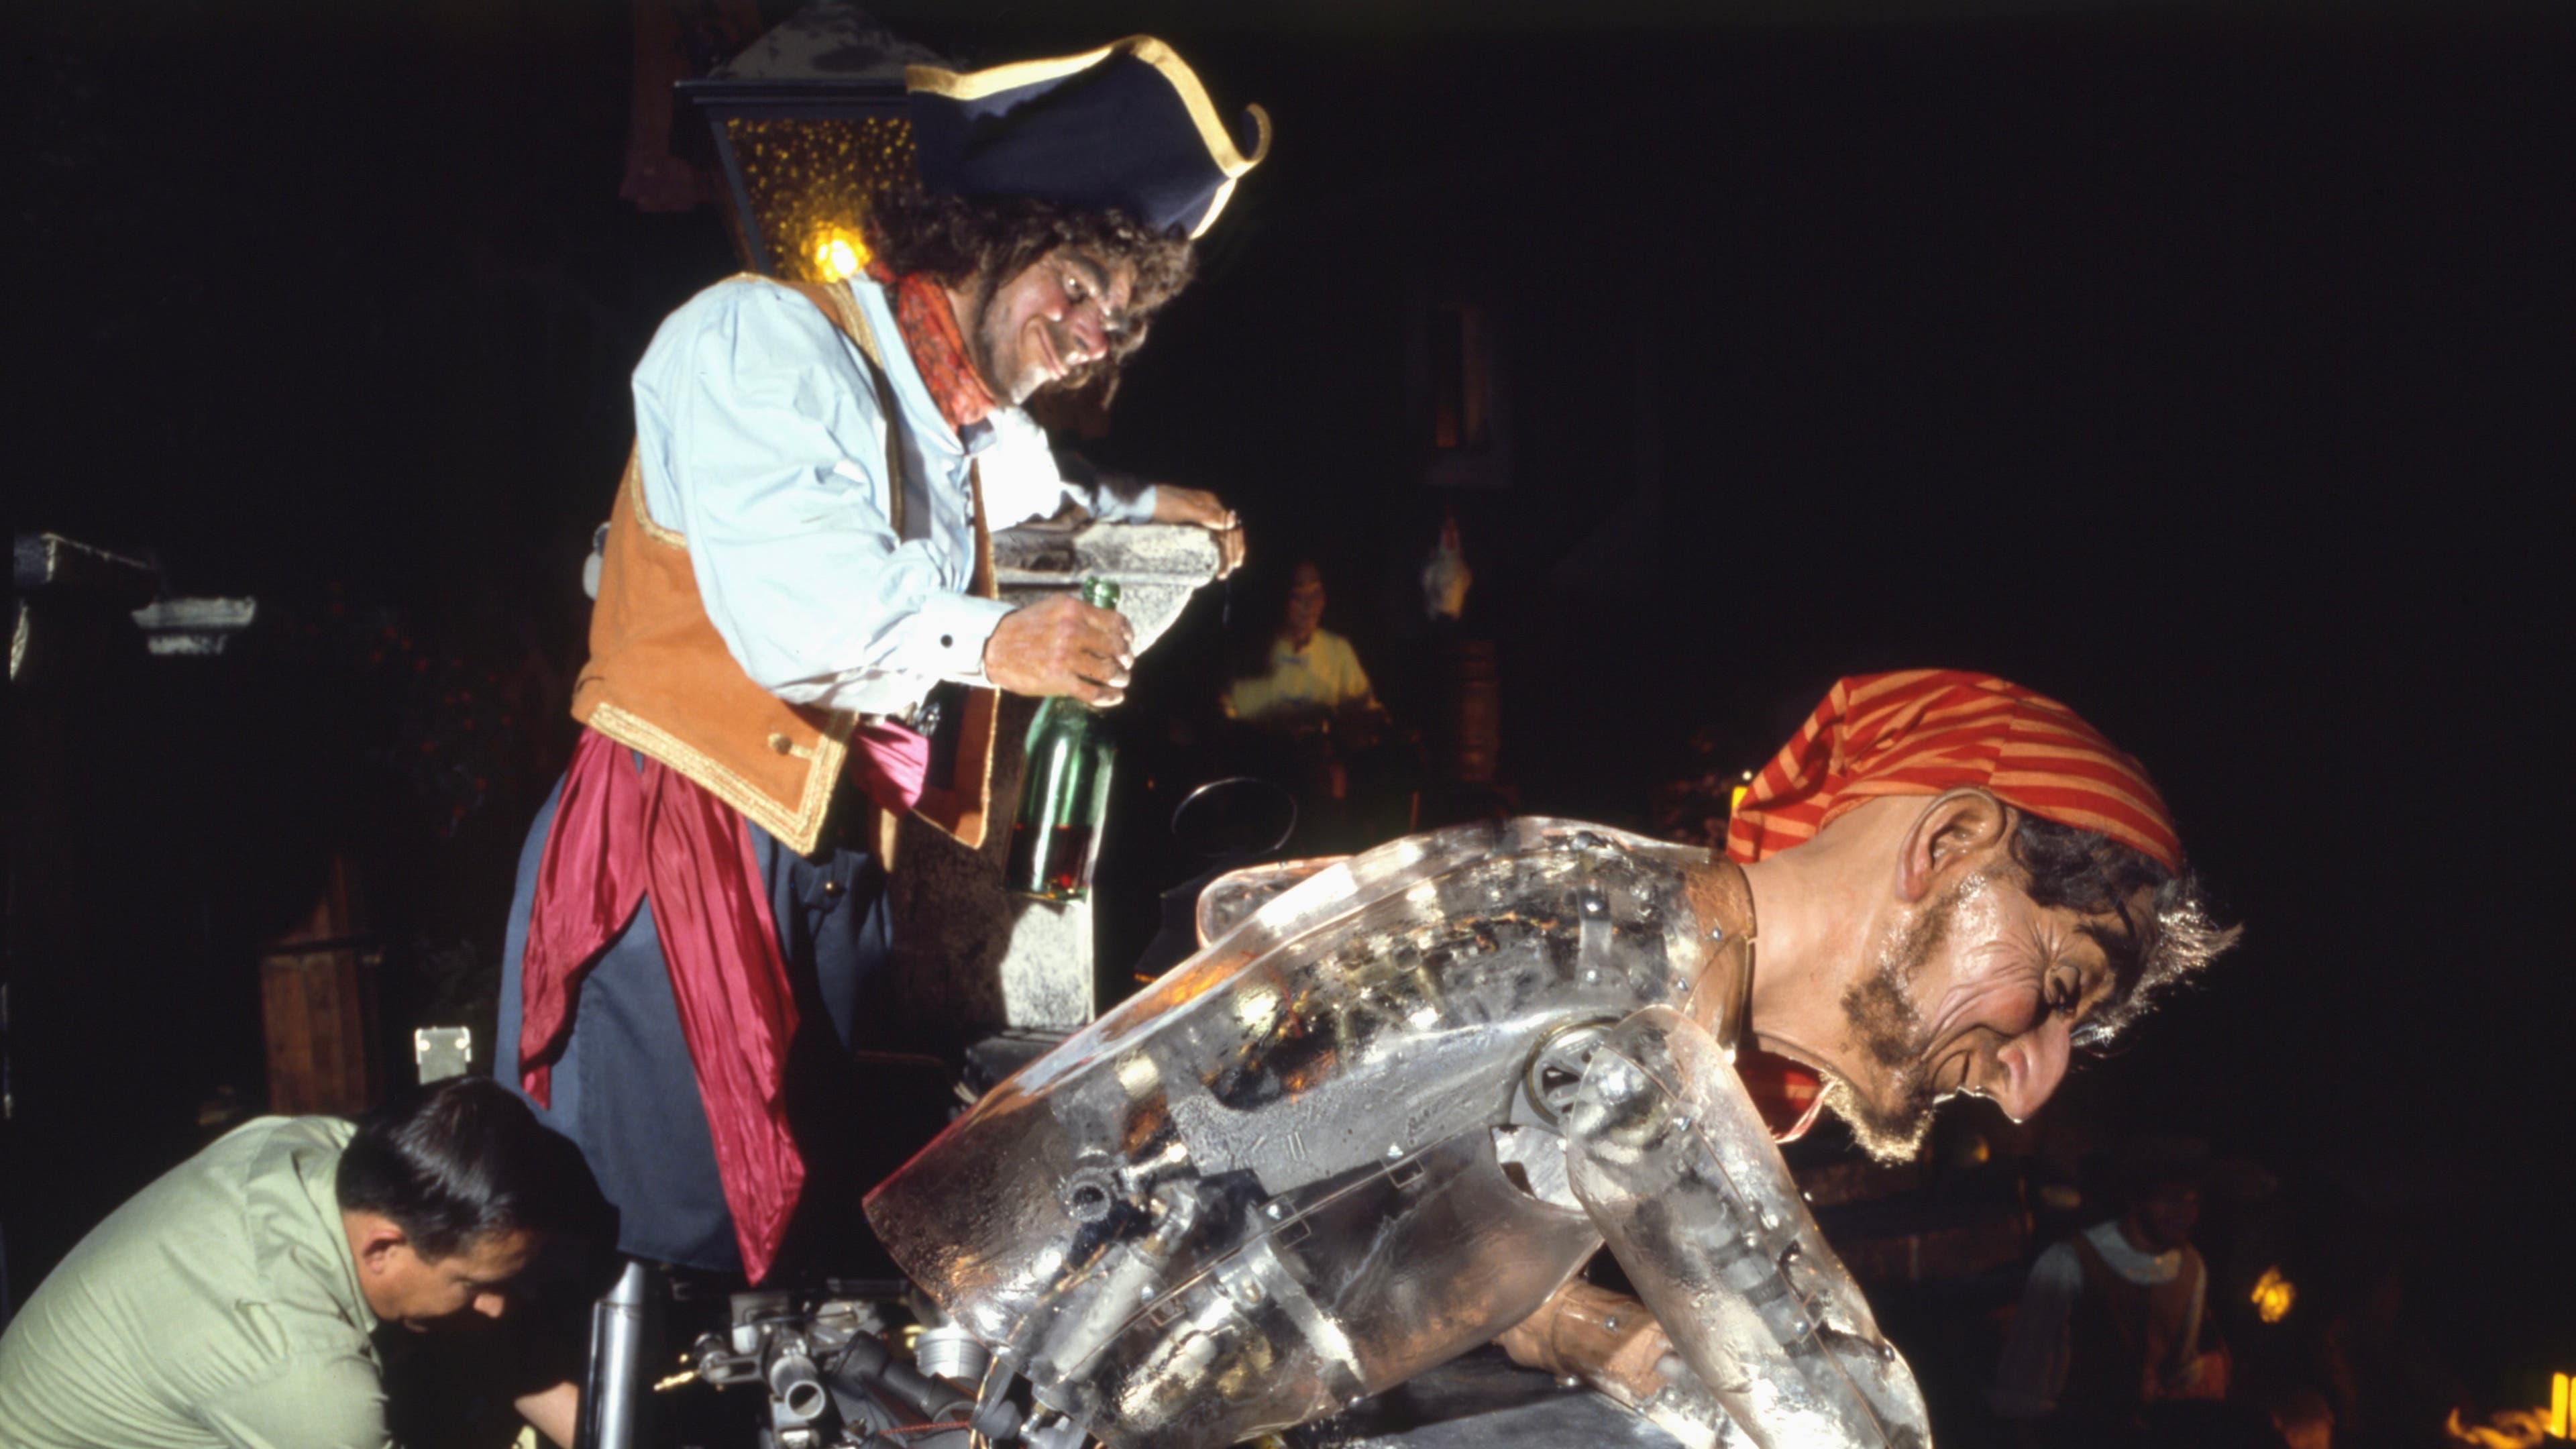 Animatronic pirate figures with realistic looking heads and robotic bodies lean over to be seen by visitors to Disney's Pirates of the Caribbean ride